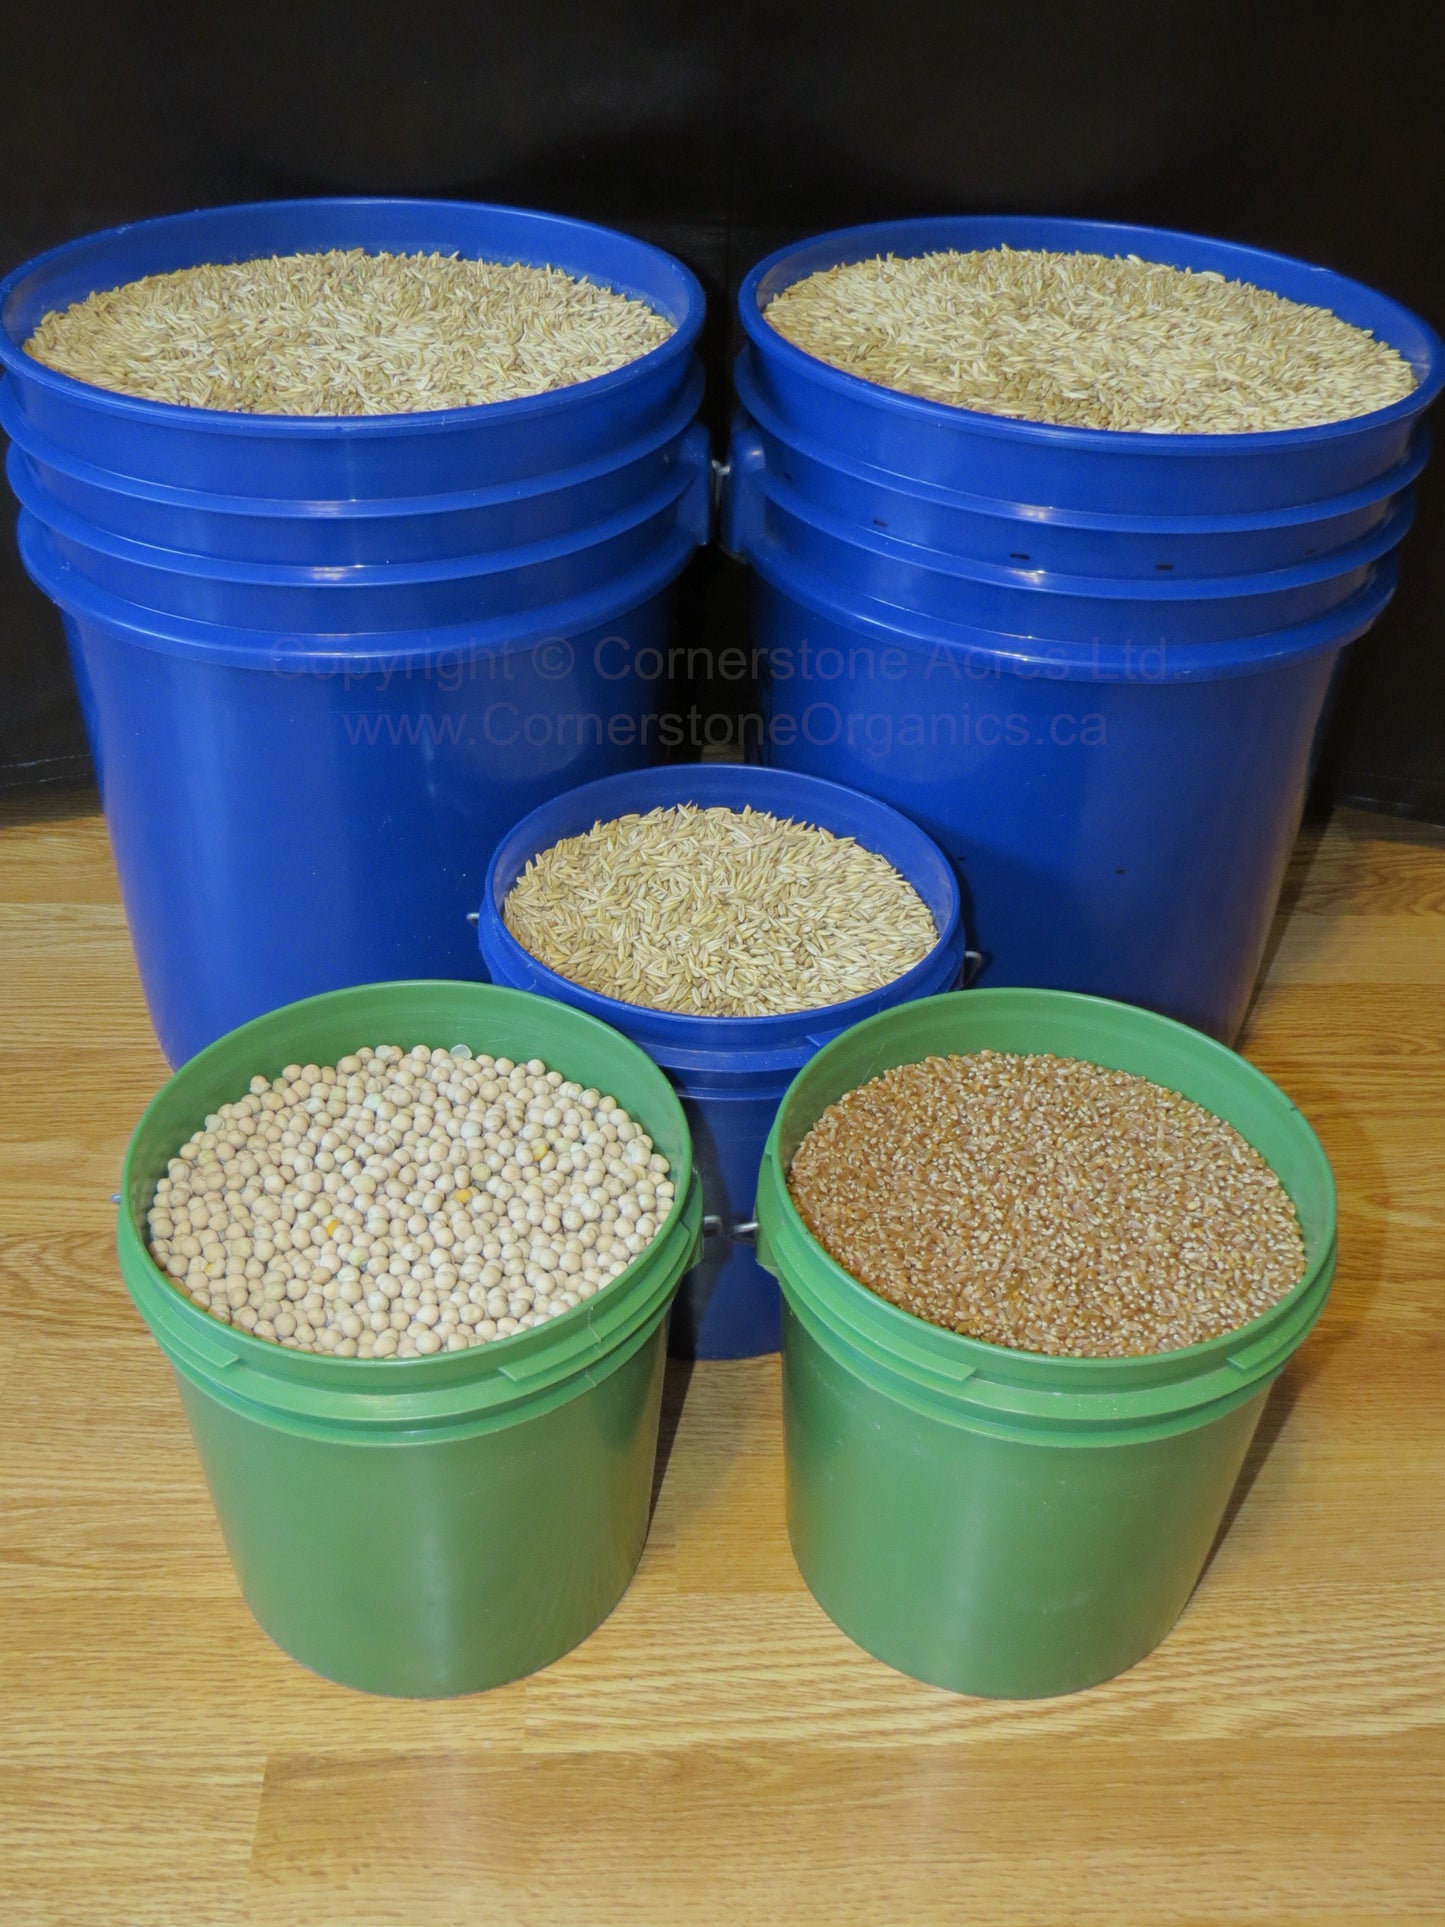 Pails of Oats, Peas, and Wheat